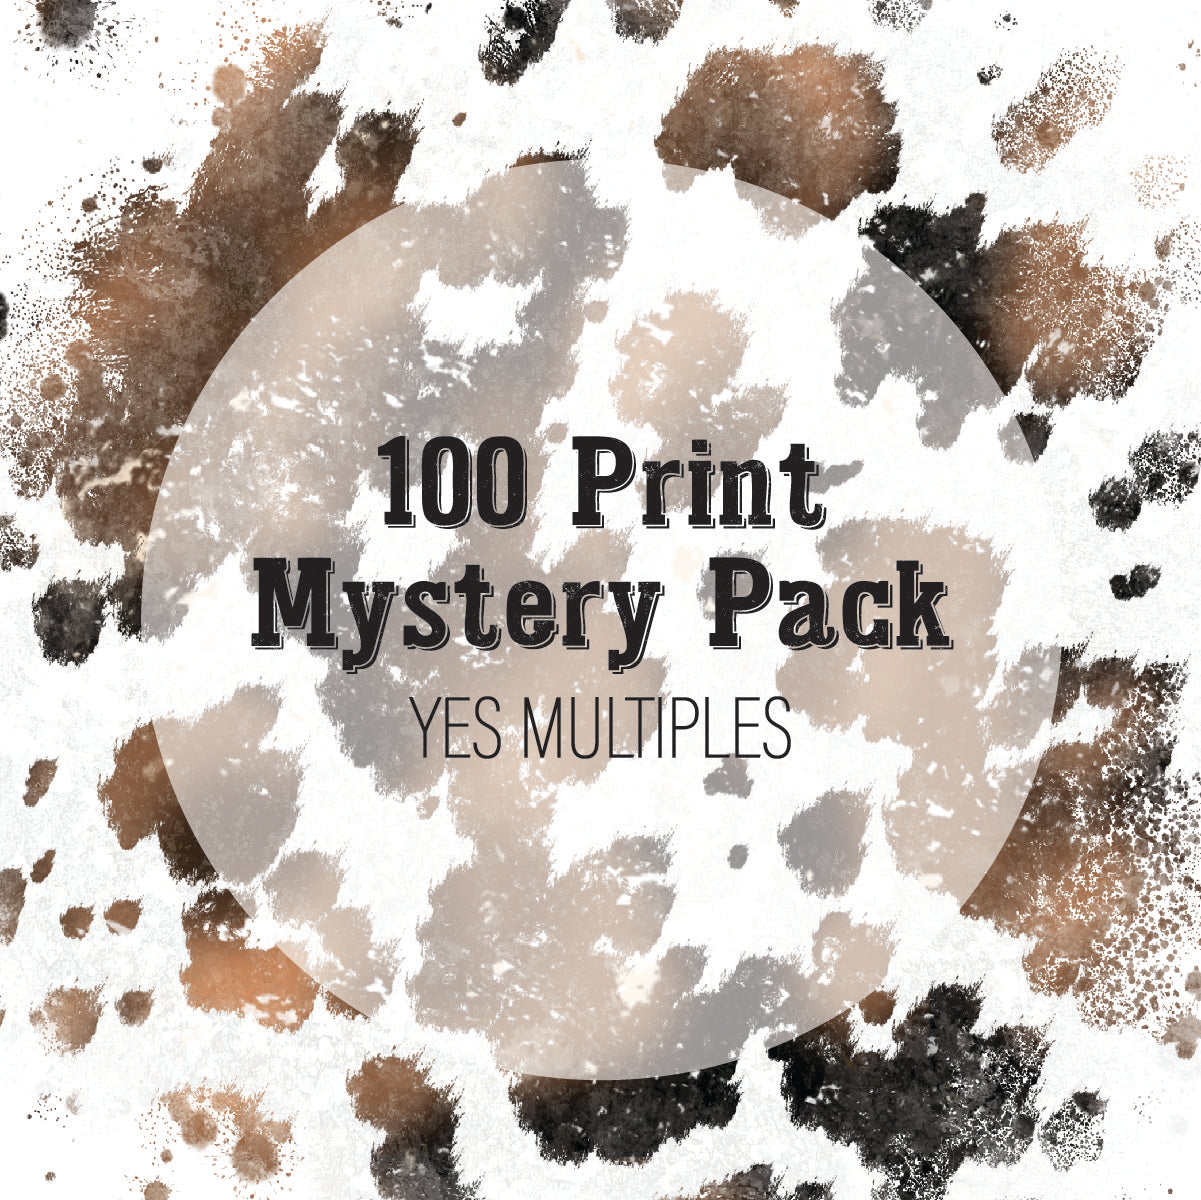 100 Prints Mystery Pack - YES Multiples